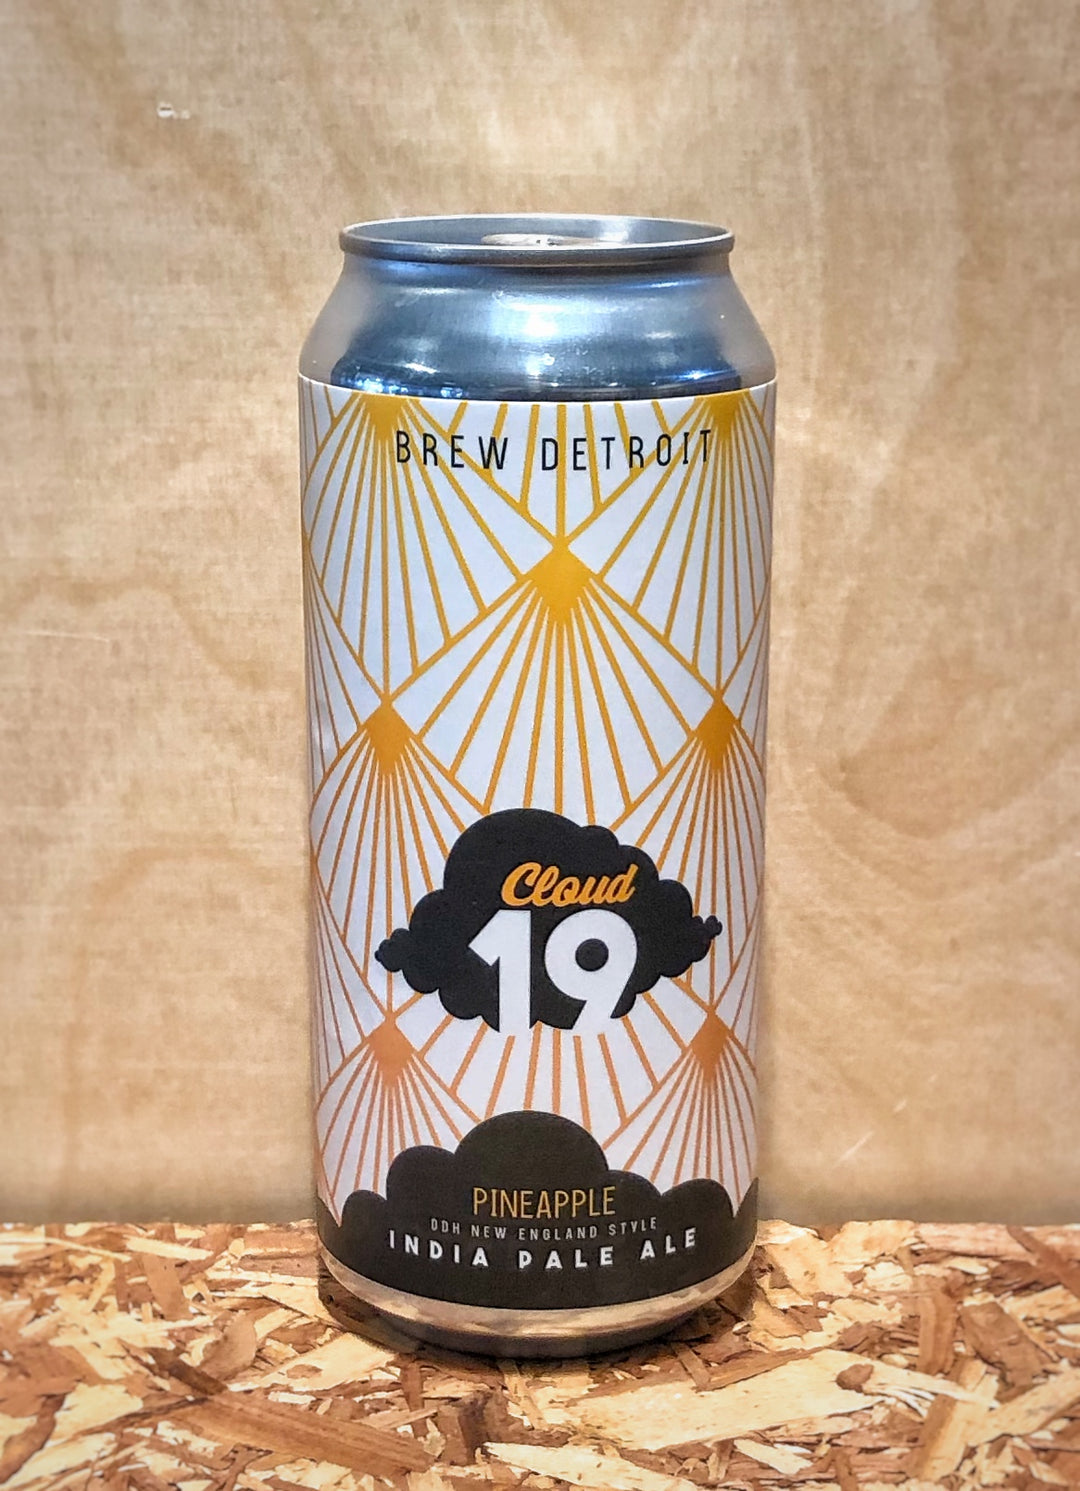 Brew Detroit 'Pineapple Cloud 19' DDH New England Pale Ale Heavily Fruited with Pineapple (Detroit, MI)